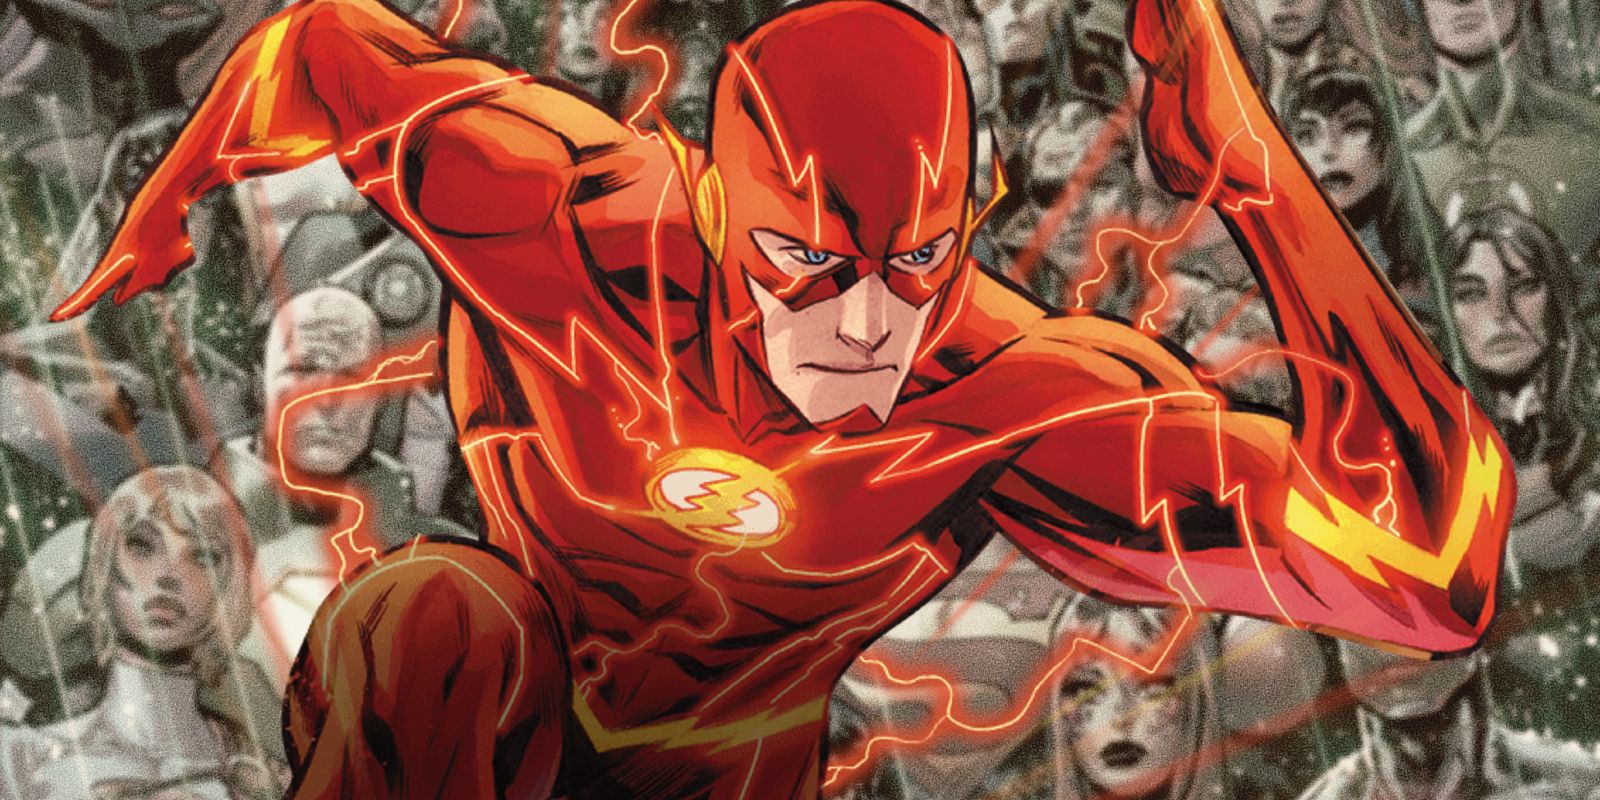 The Flash overlaid on the cover of Lazarus Planet - Omega